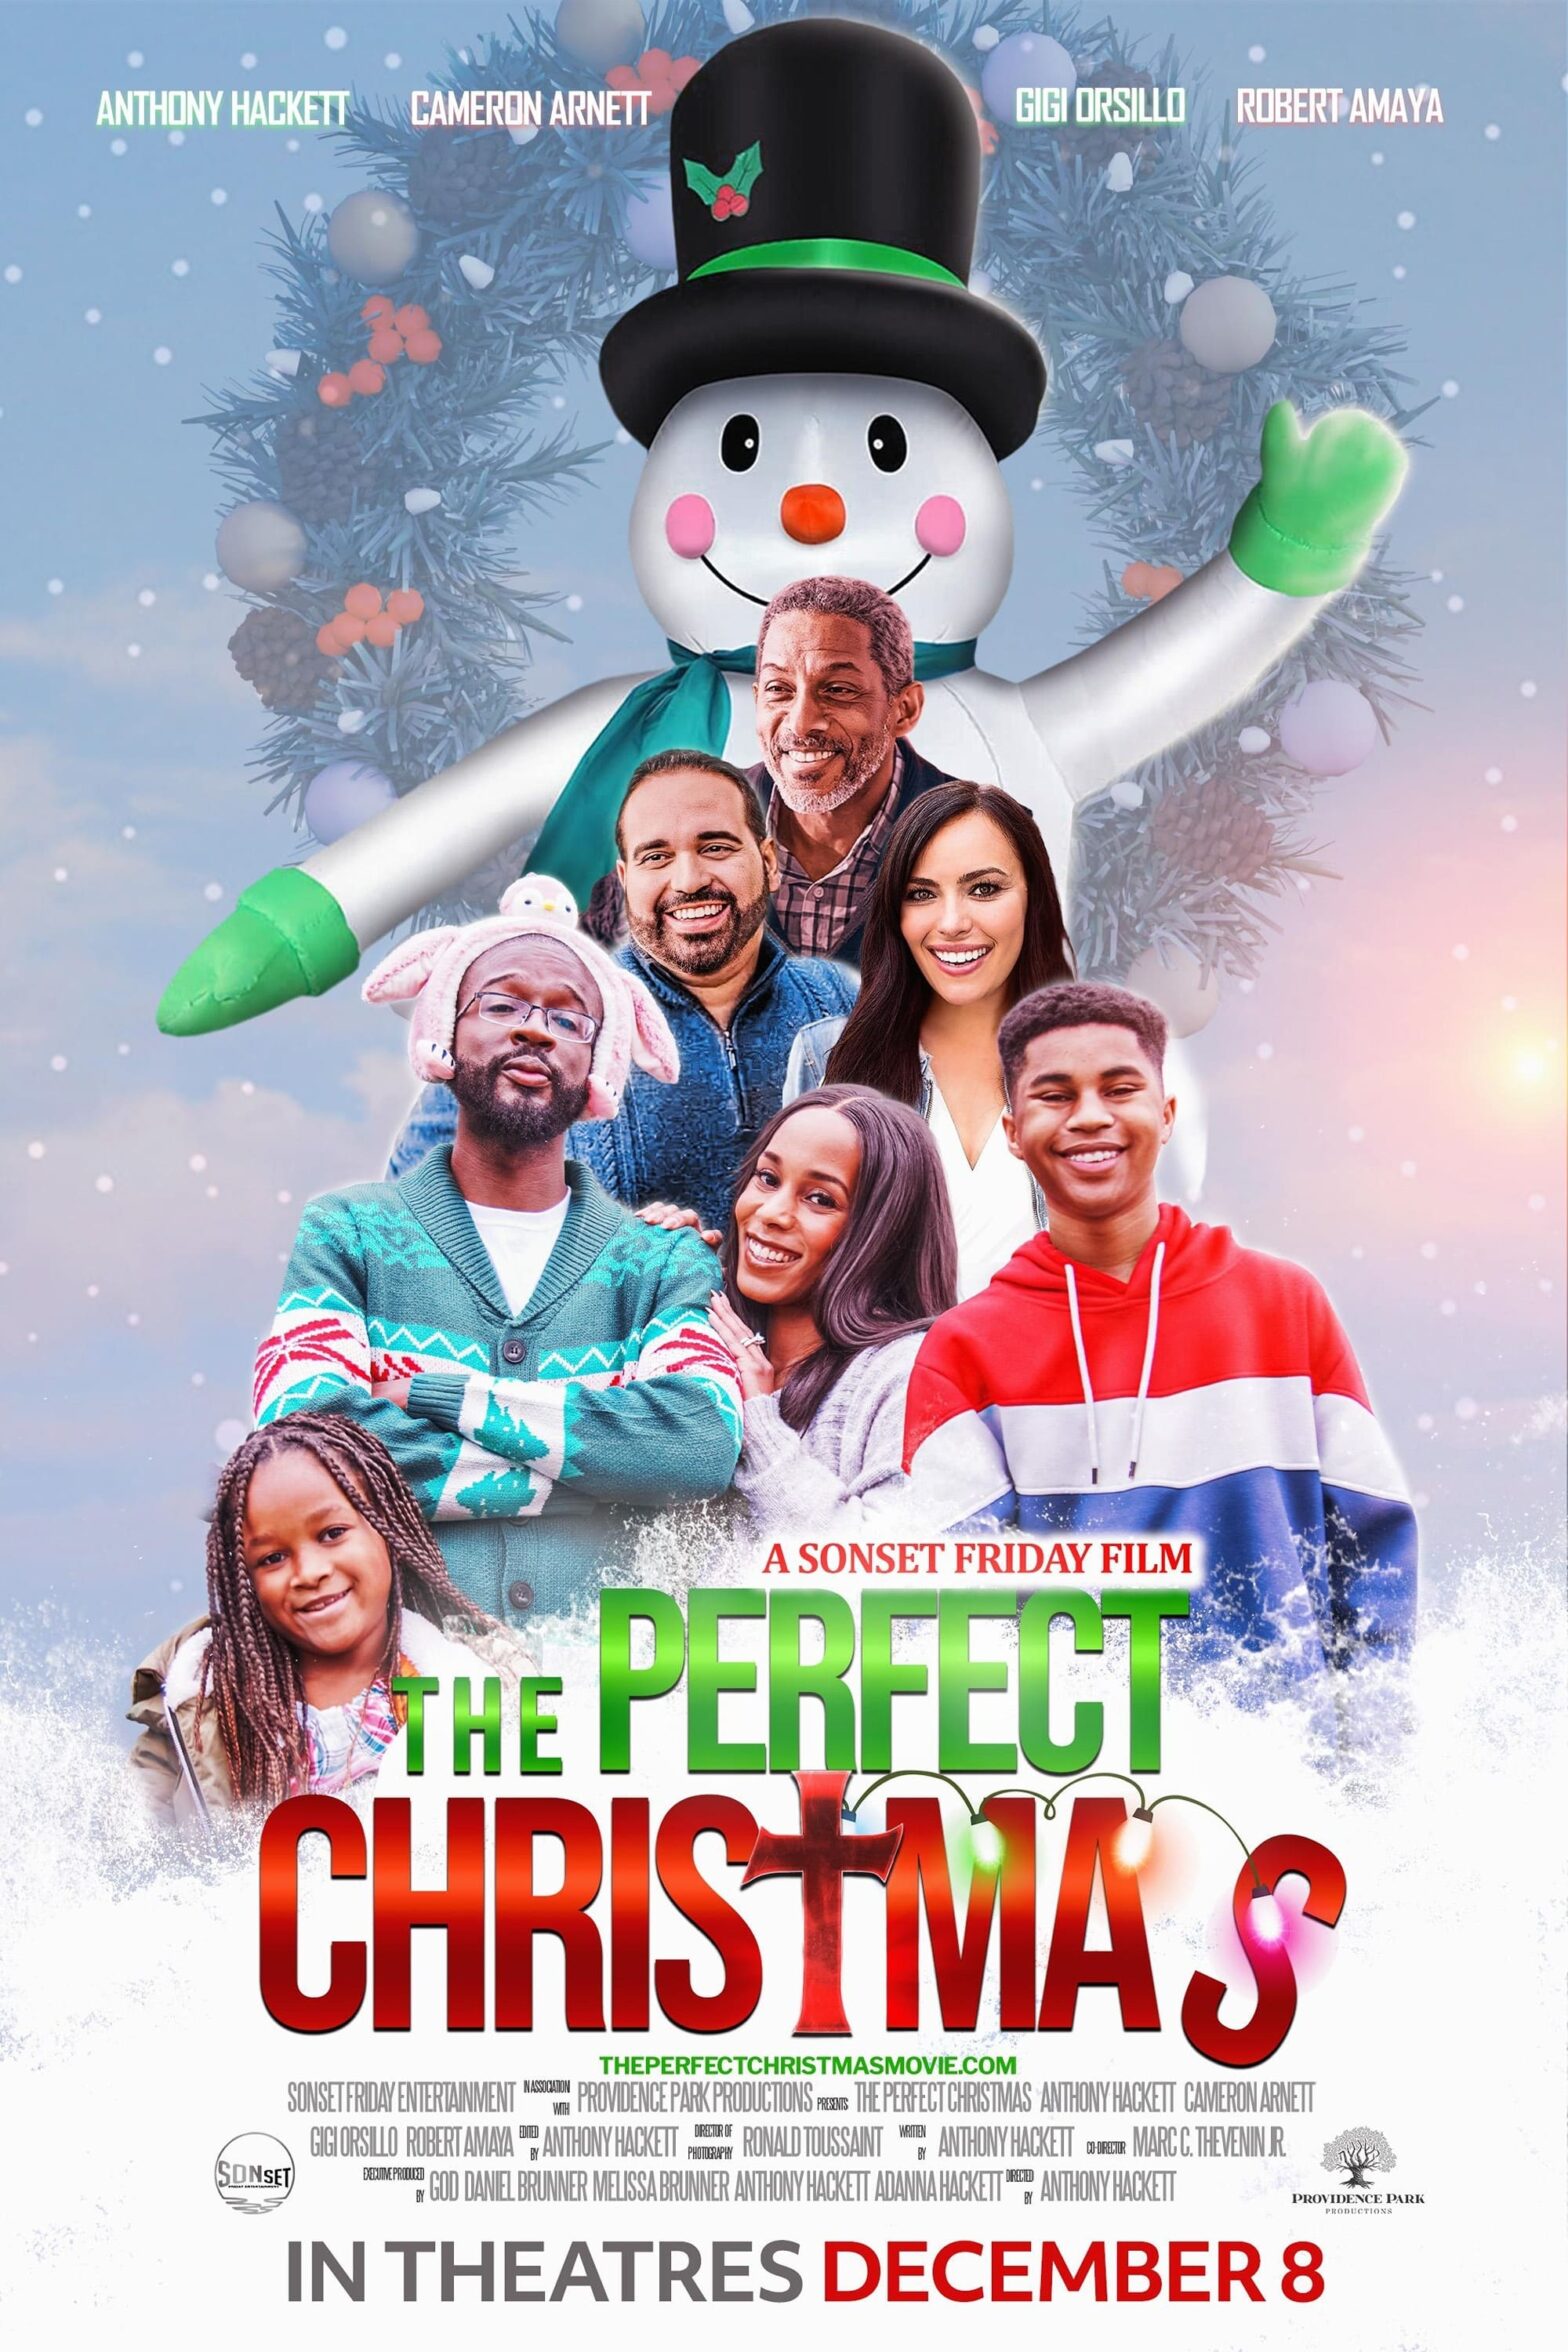 Poster for the movie "The Perfect Christmas"